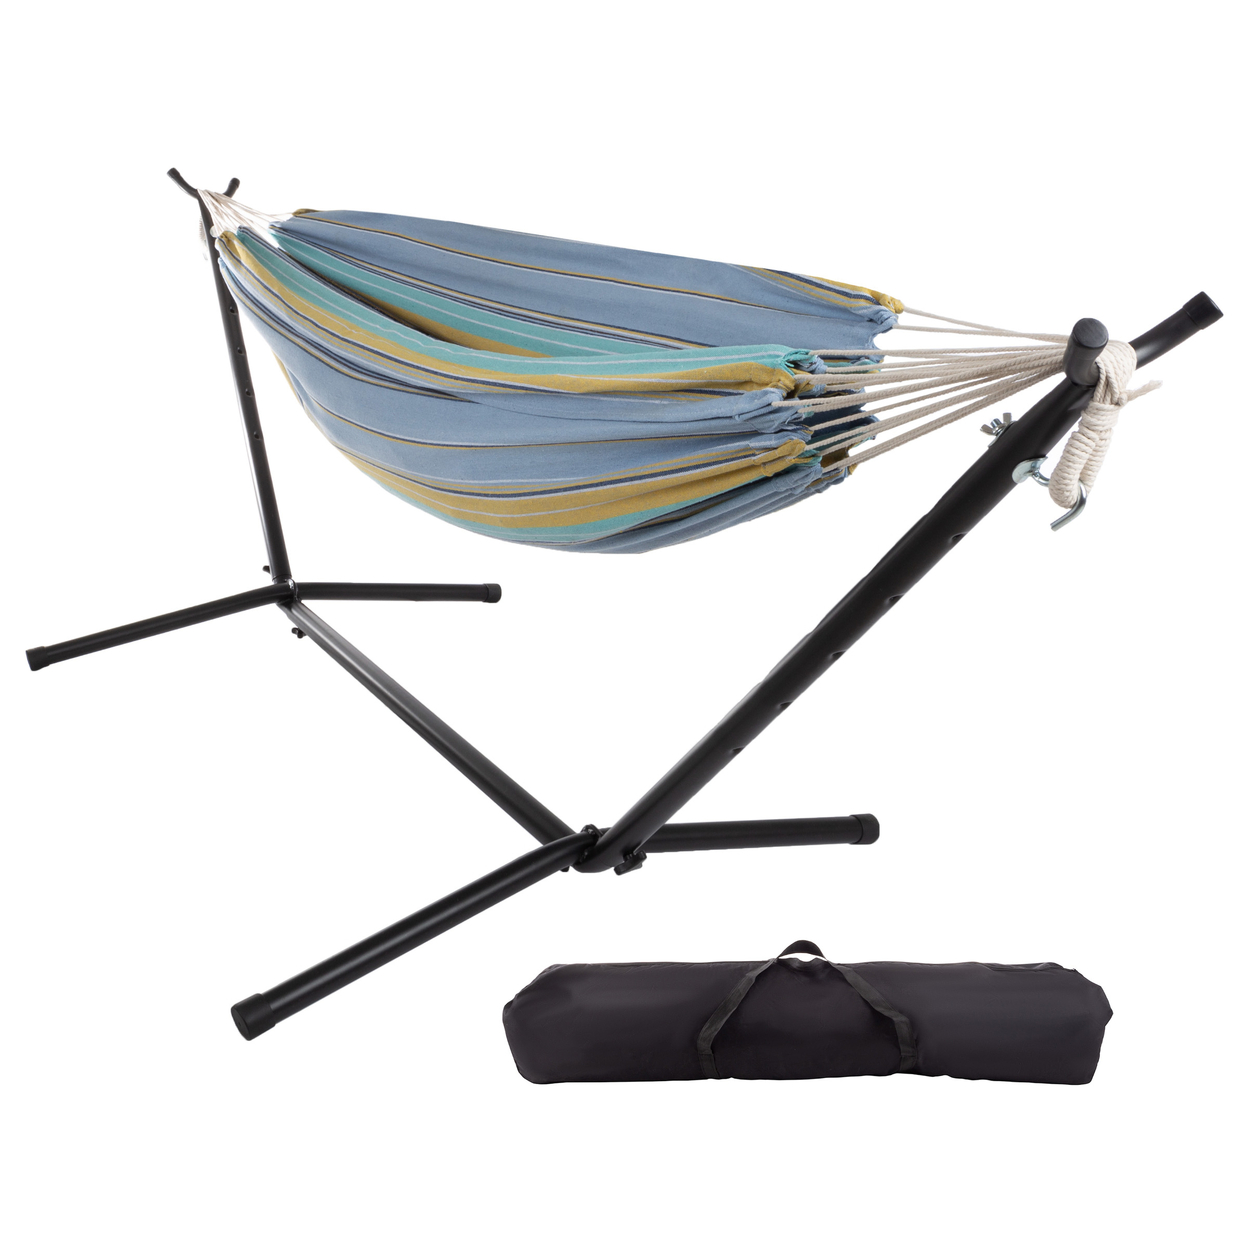 Portable Double Hammock With Stand Carry Case Camping Fishing Outdoor